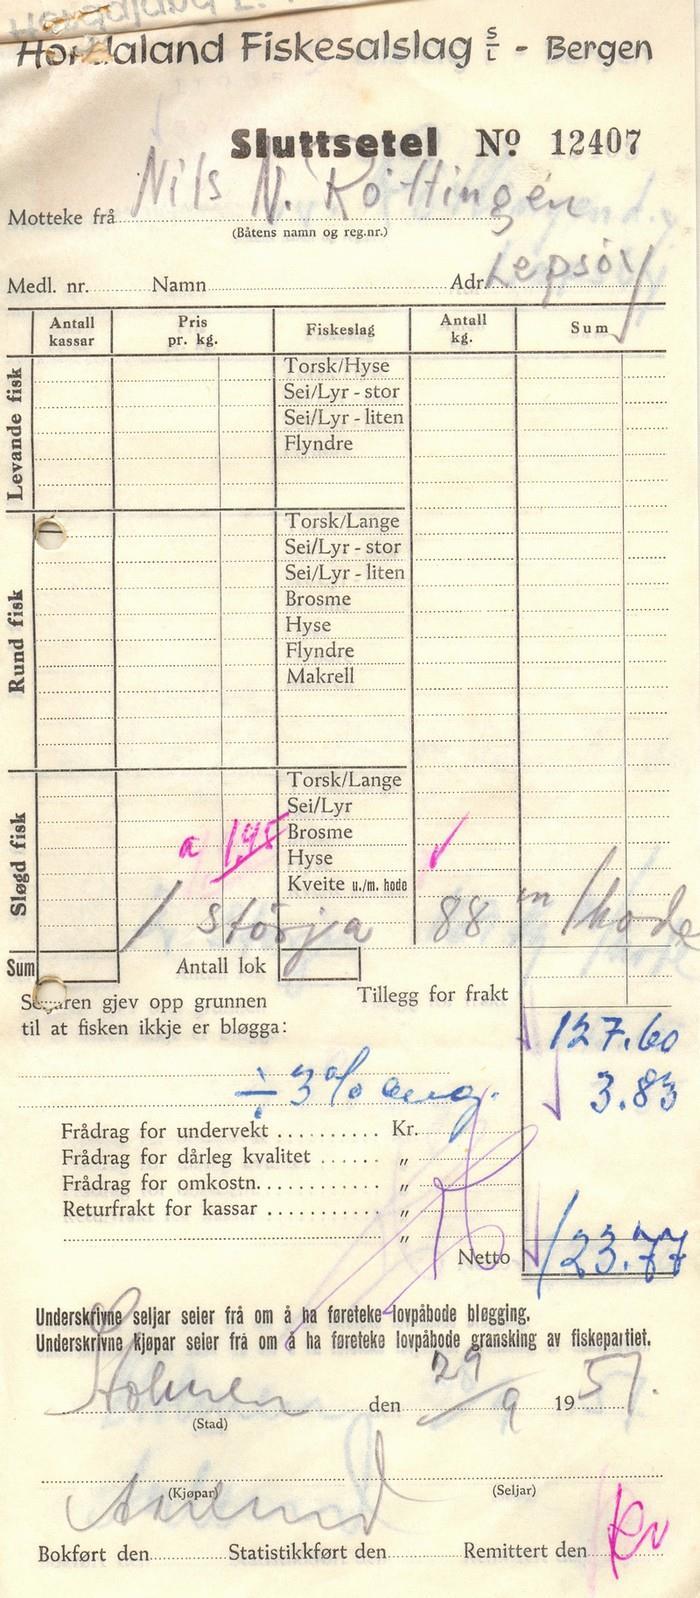 Figure 1. A reciept for a bluefin tuna weighing 88 kg caught with a harpoon gun. The next document is from a private company buying BFT from the sales organization in August 1952 (Figure 2).